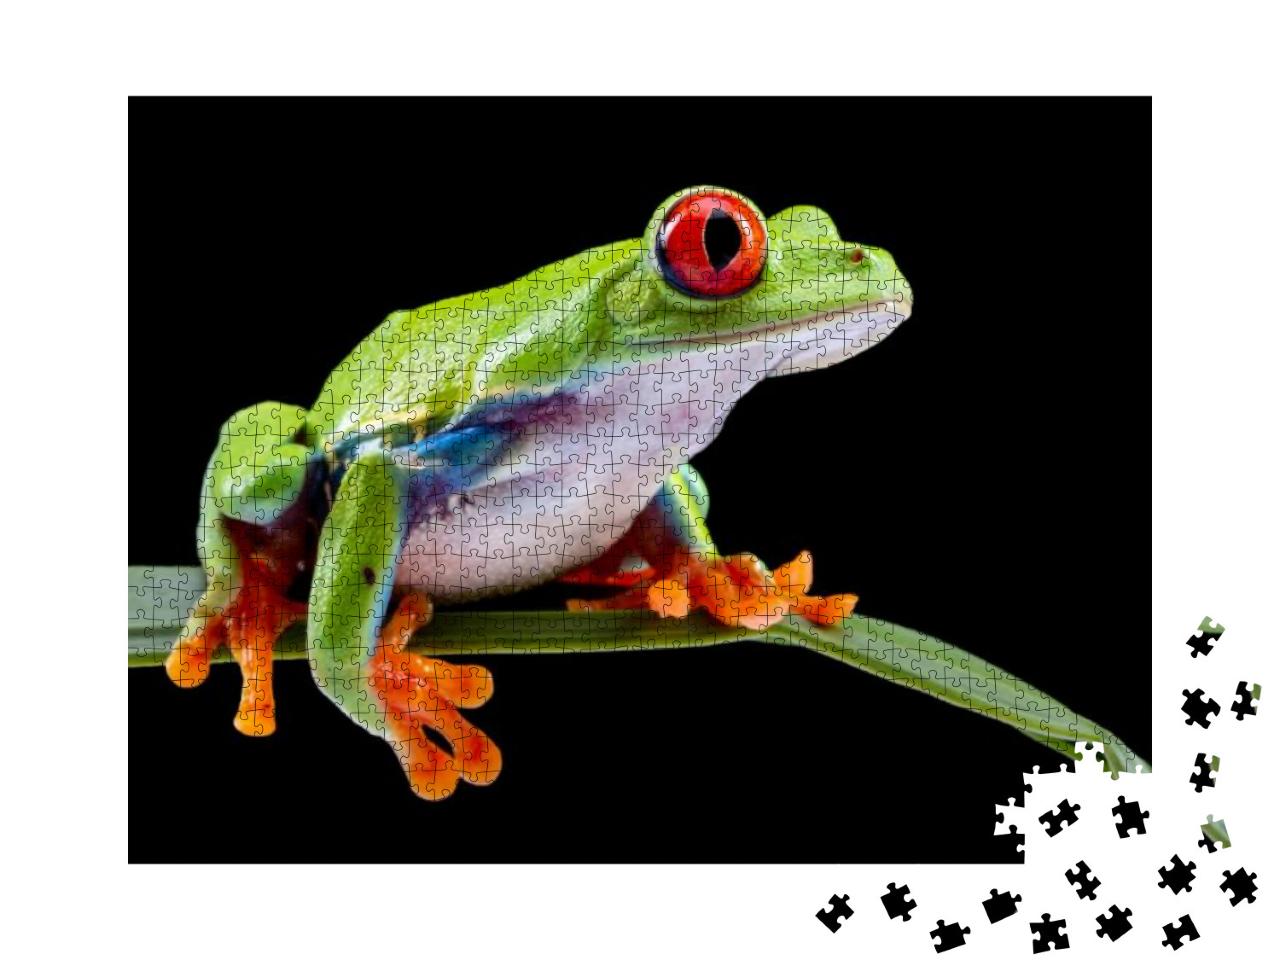 Red Eyed Tree Frog, Agalychnis Callidryas, on a Leaf with... Jigsaw Puzzle with 1000 pieces